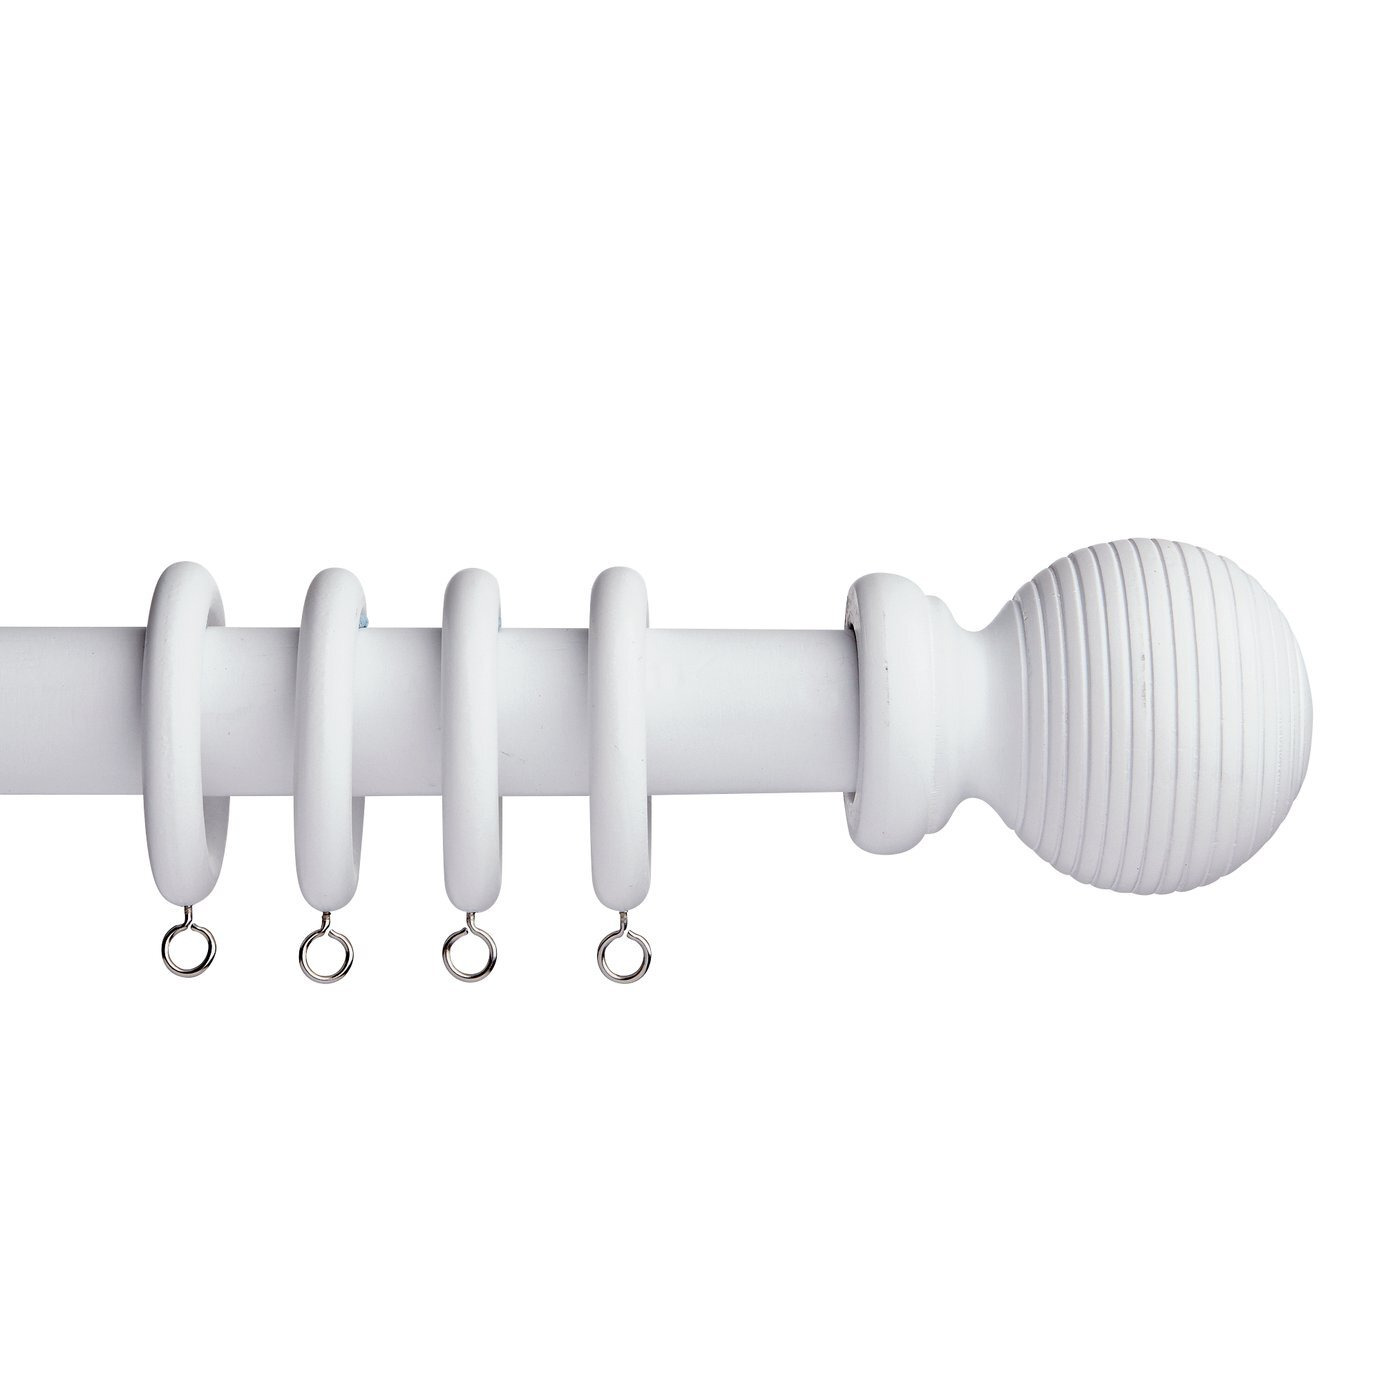 Argos Home 1.2m Grooved Ball Wooden Curtain Pole - White - image 1